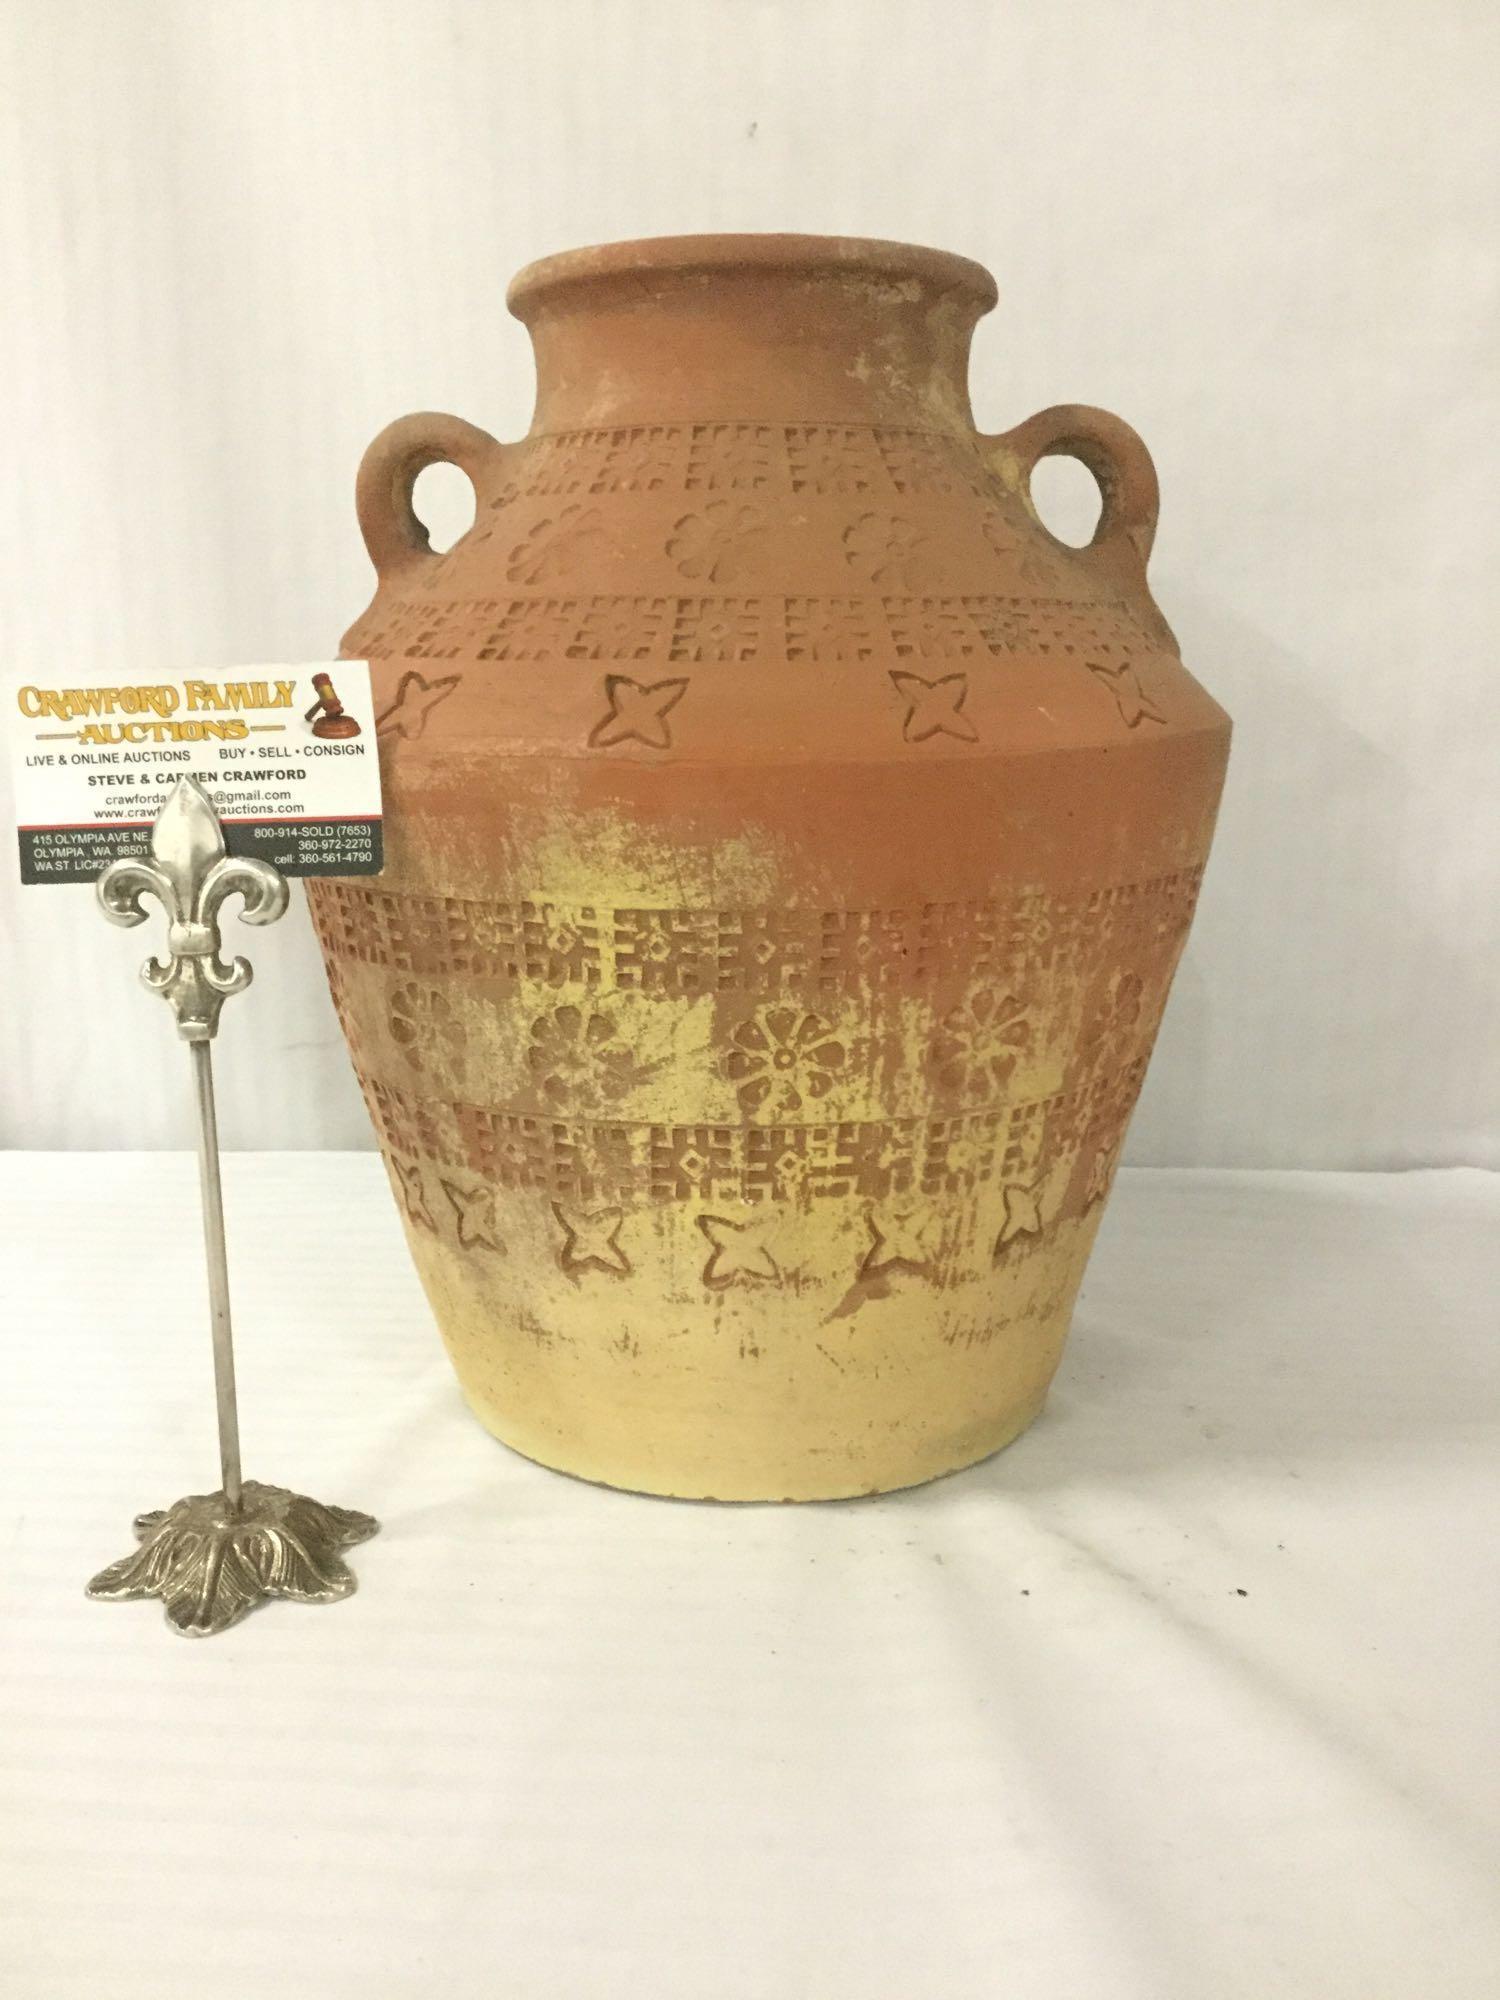 Vintage ceramic 2-handled vase w/star & floral incised designs, some wear, approx 11x11x13 inches